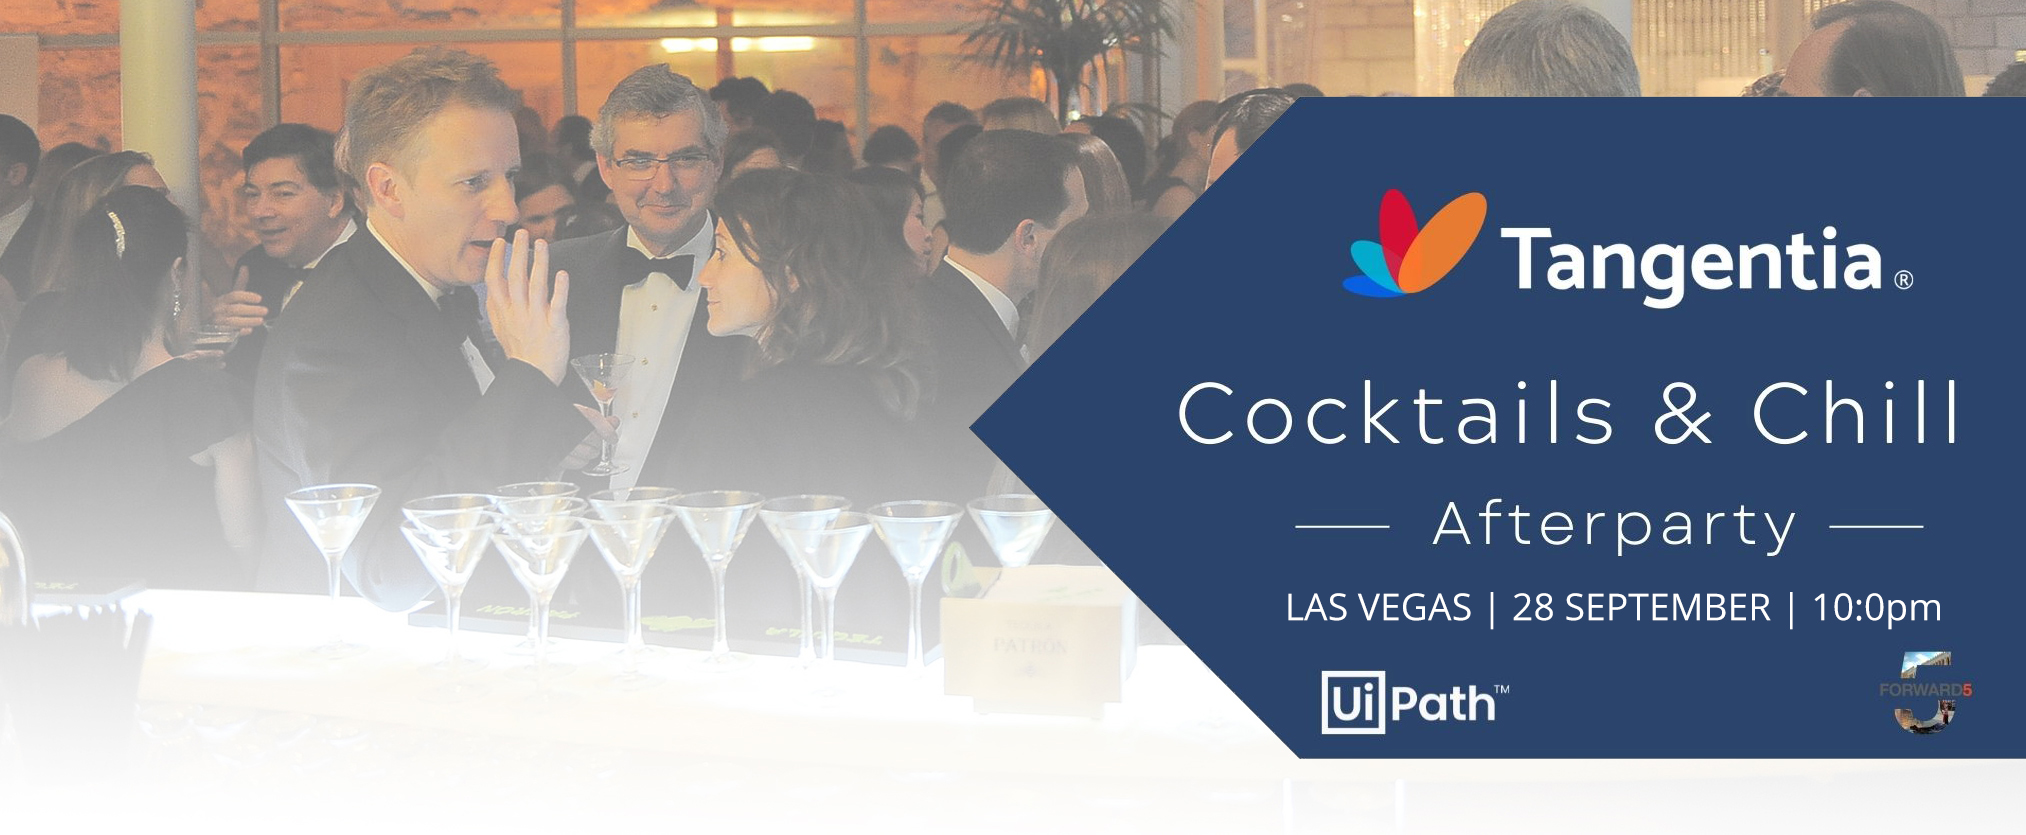 Tangentia Cocktails and Chill Afterpart at UiPath Forward5